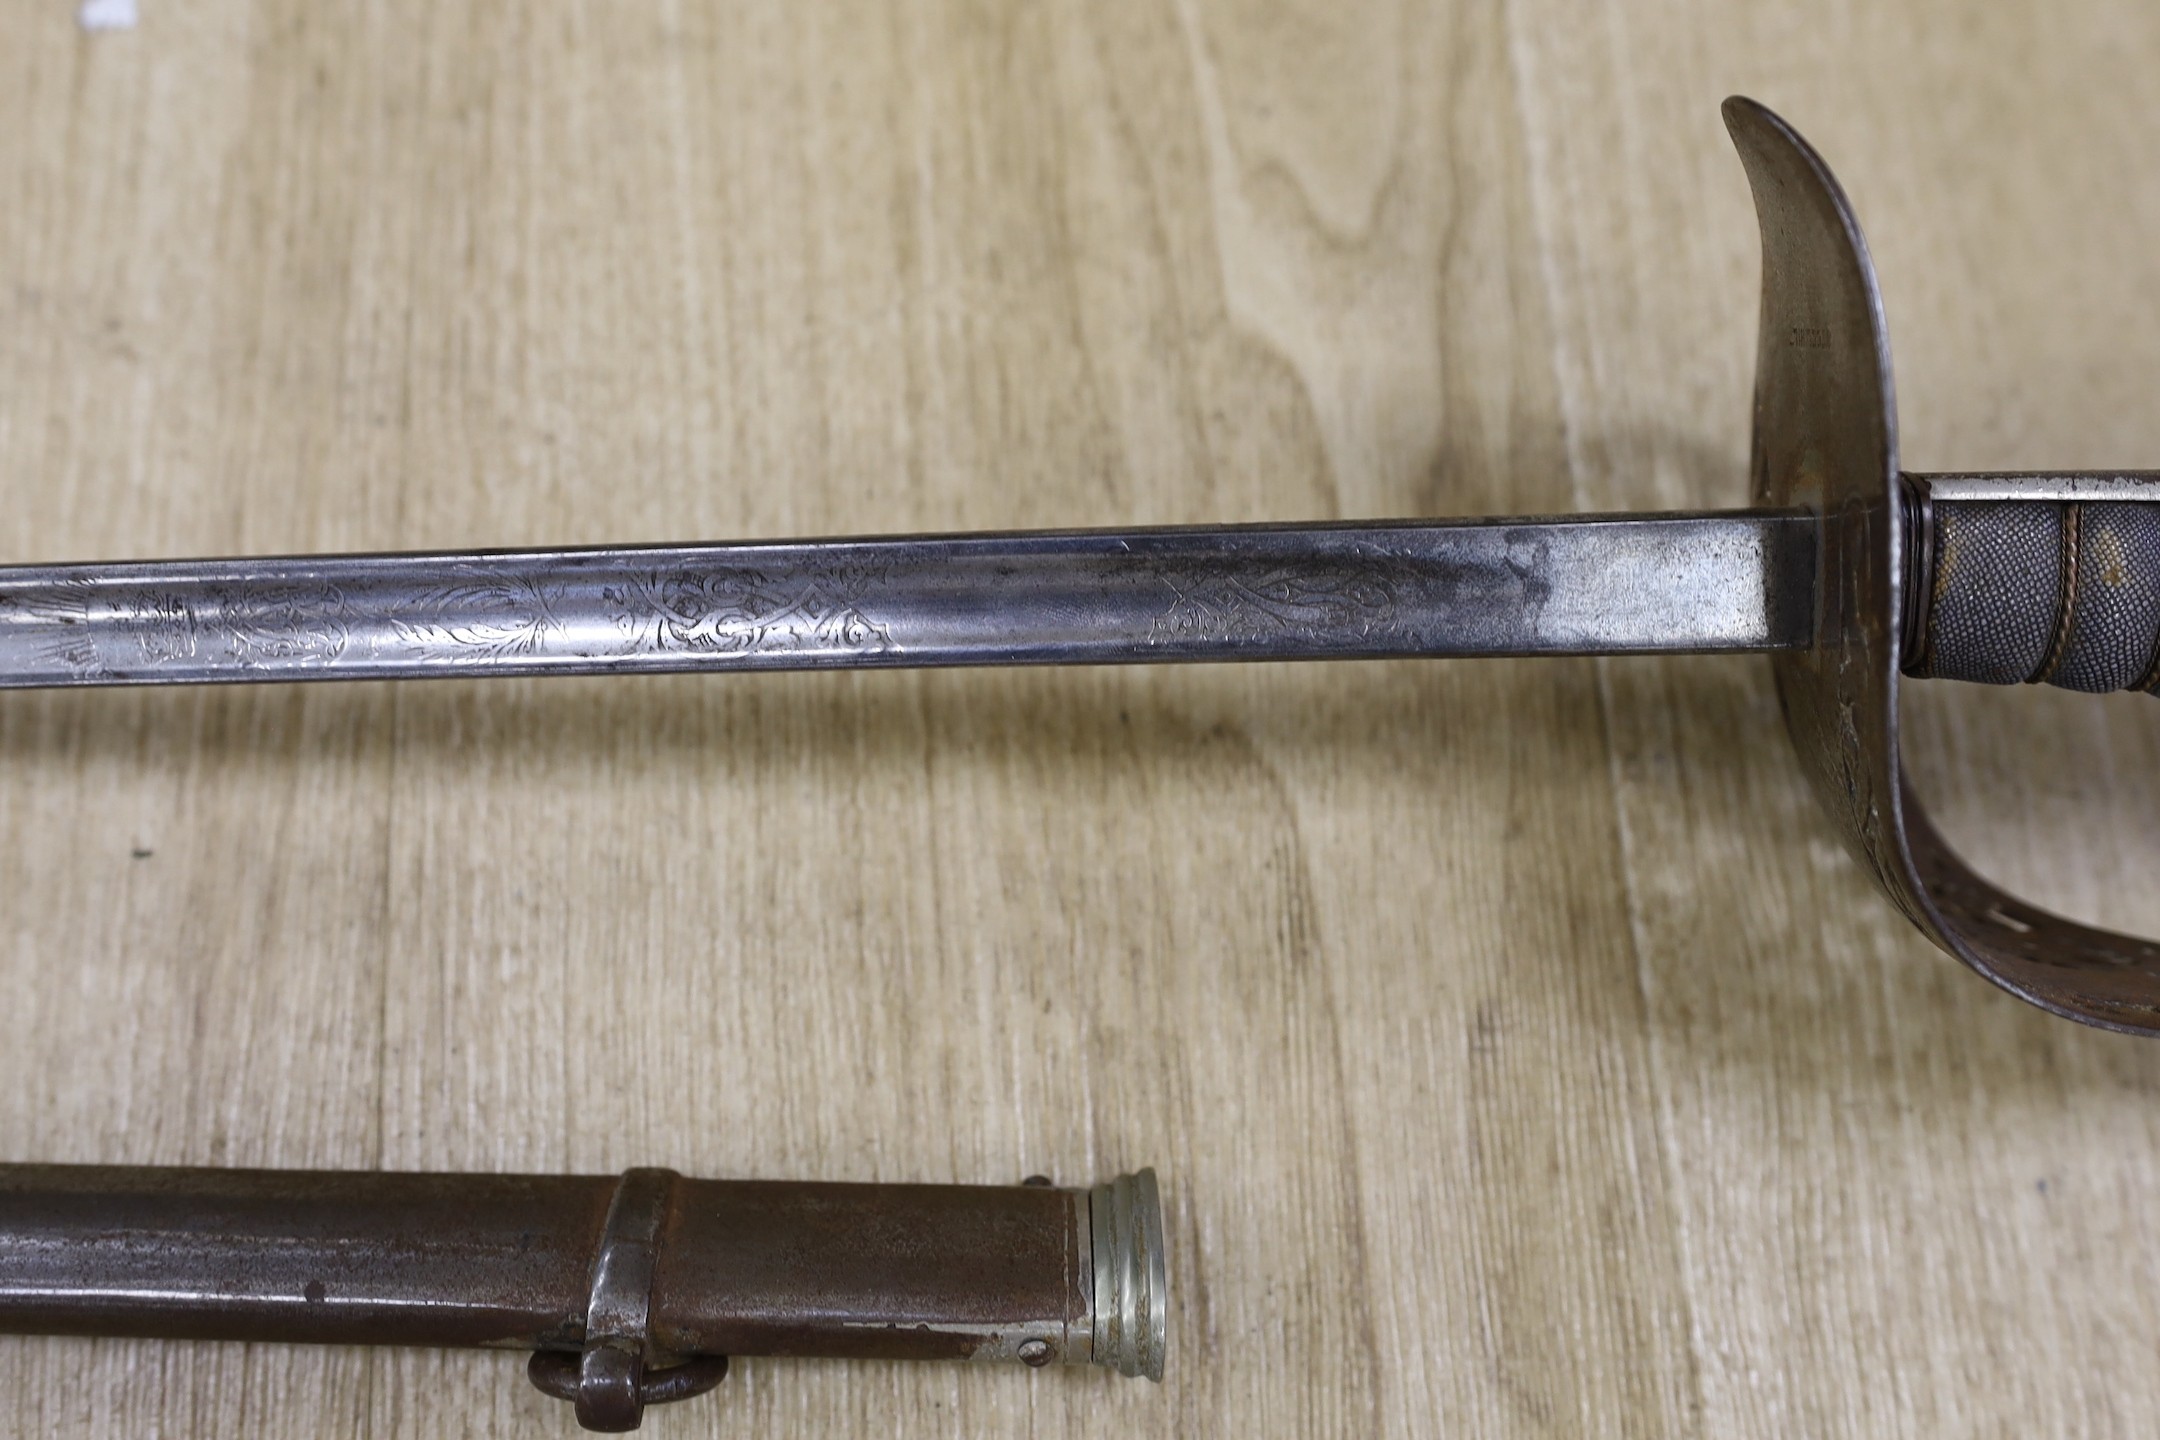 A George V officers sword with scabbard and a bayonet, sword100cm long